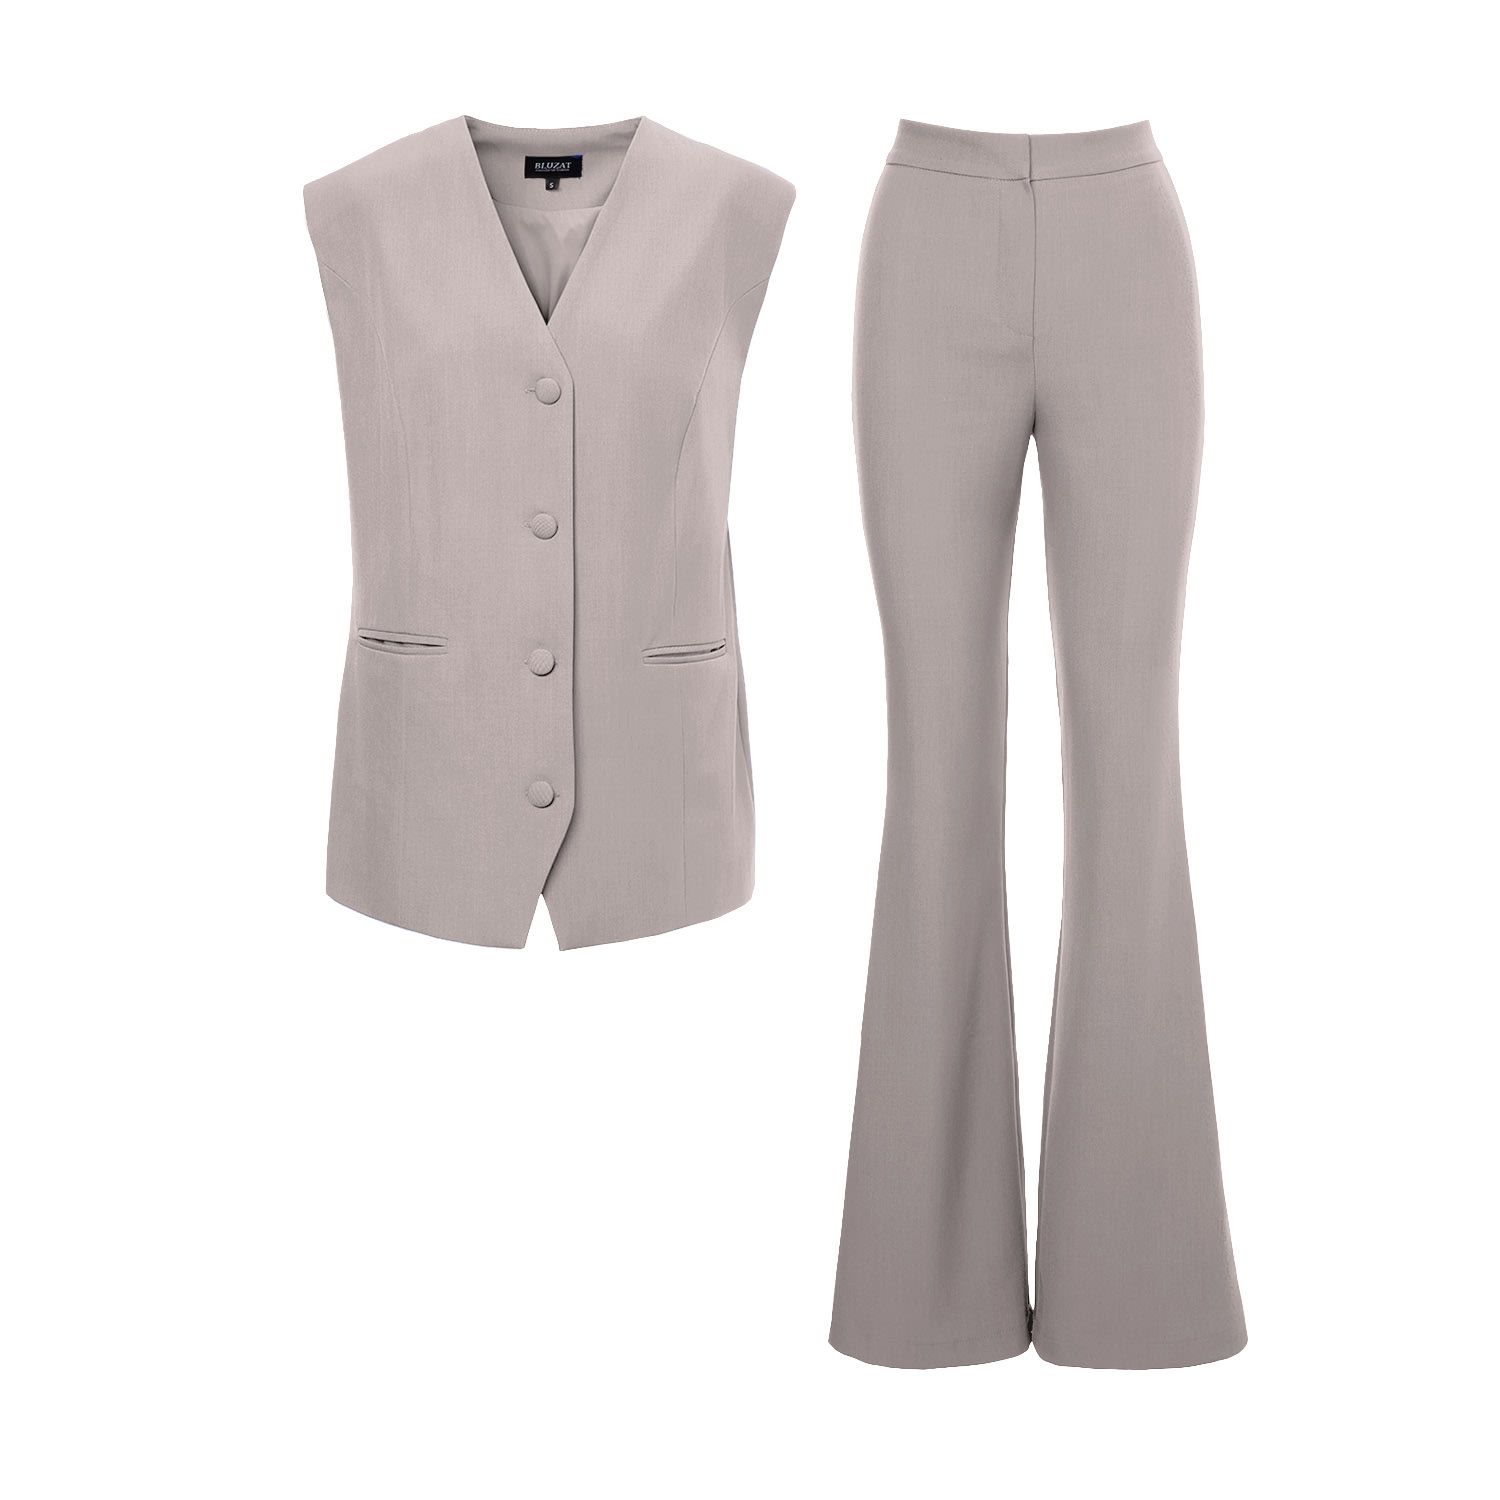 Women’s Neutrals Beige Suit With Oversized Vest And Flared Trousers Medium Bluzat